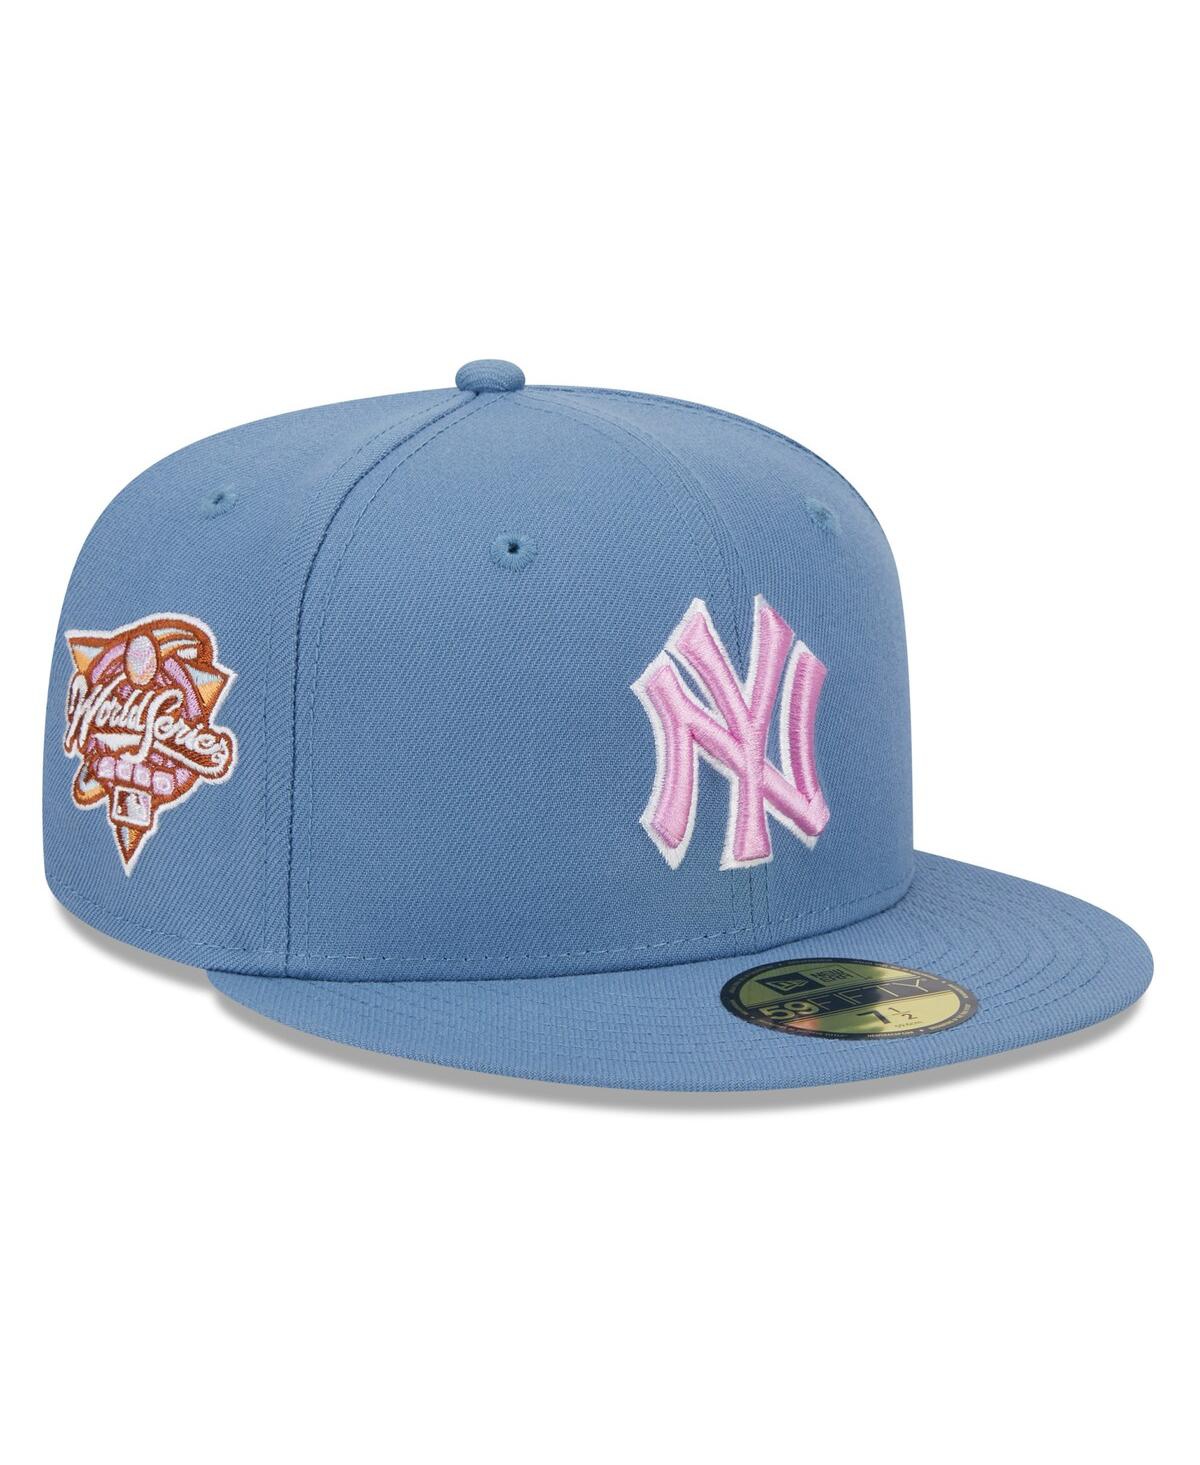 Men's New York Yankees Faded Blue Color Pack 59Fifty Fitted Hat - Blue